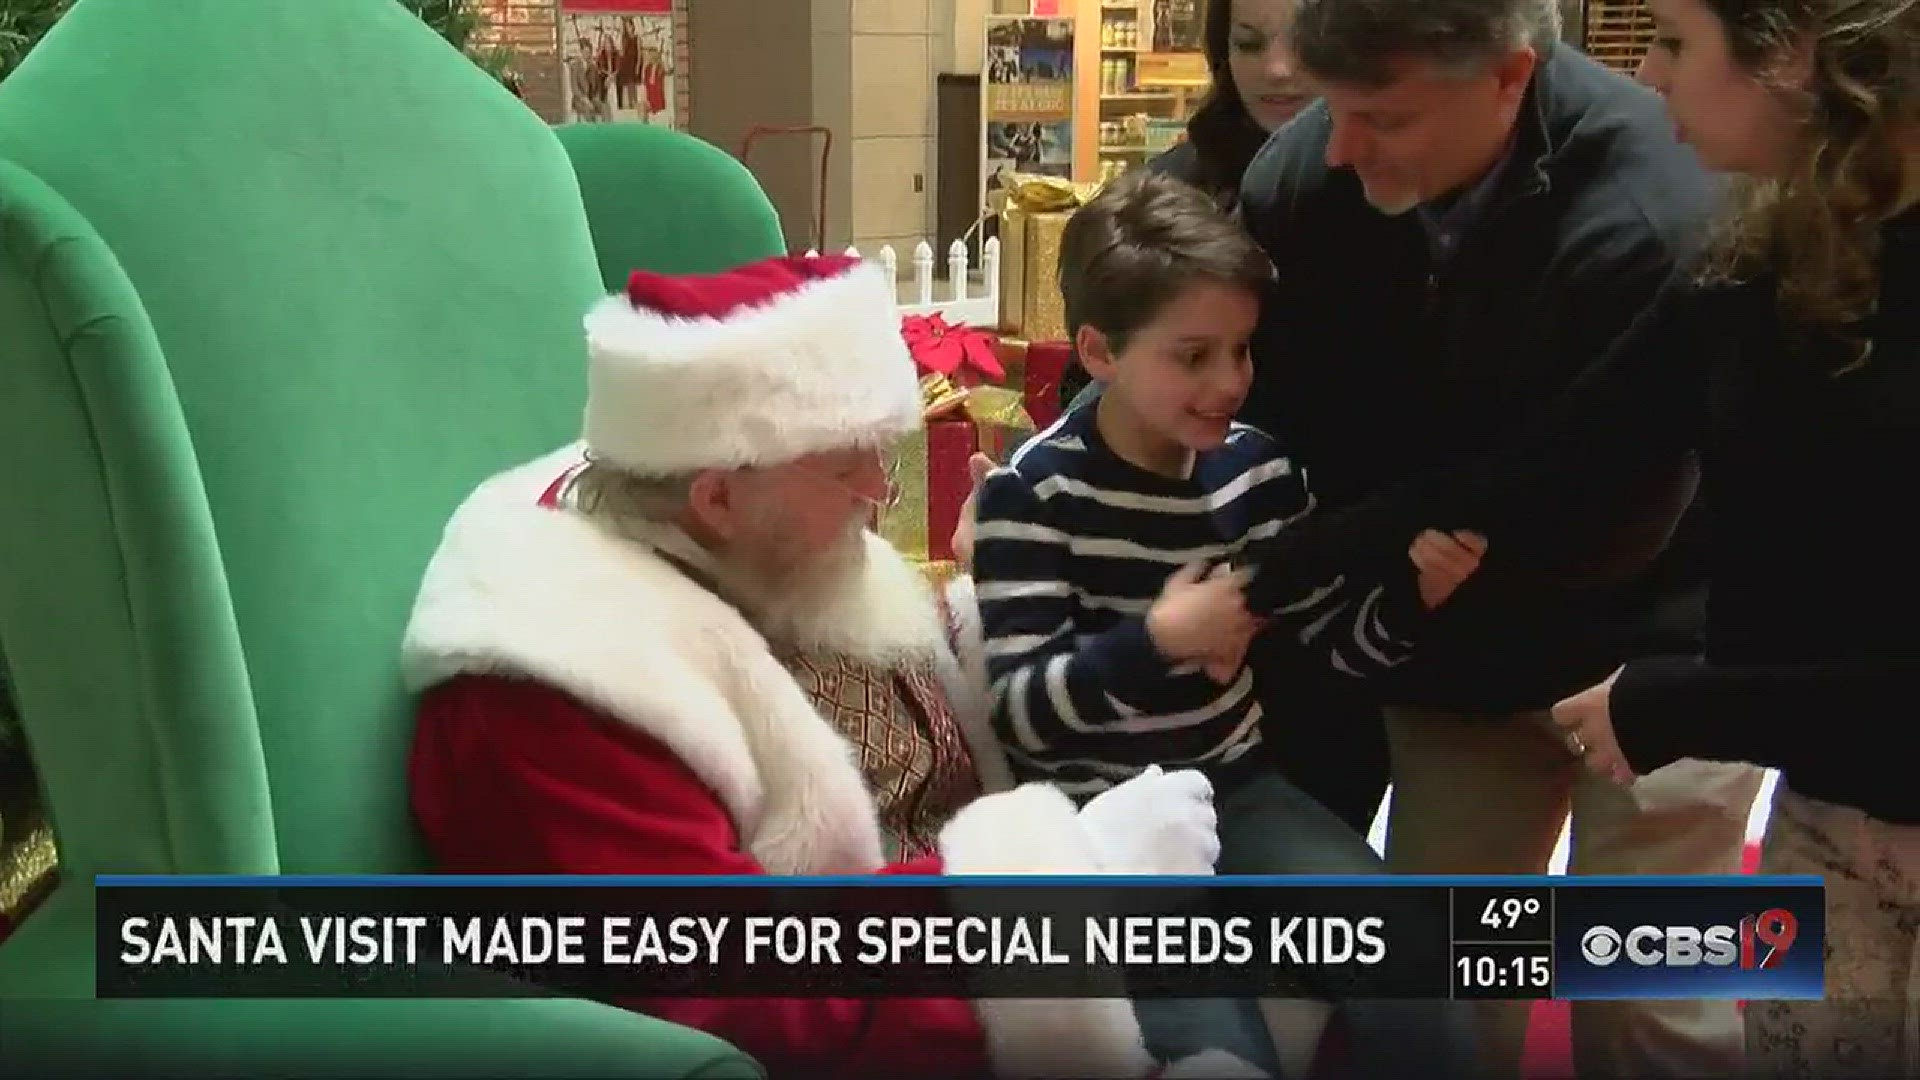 Tyler's Broadway Square Mall opened early Sunday, Dec. 4 so a special group of kids could meet Santa.